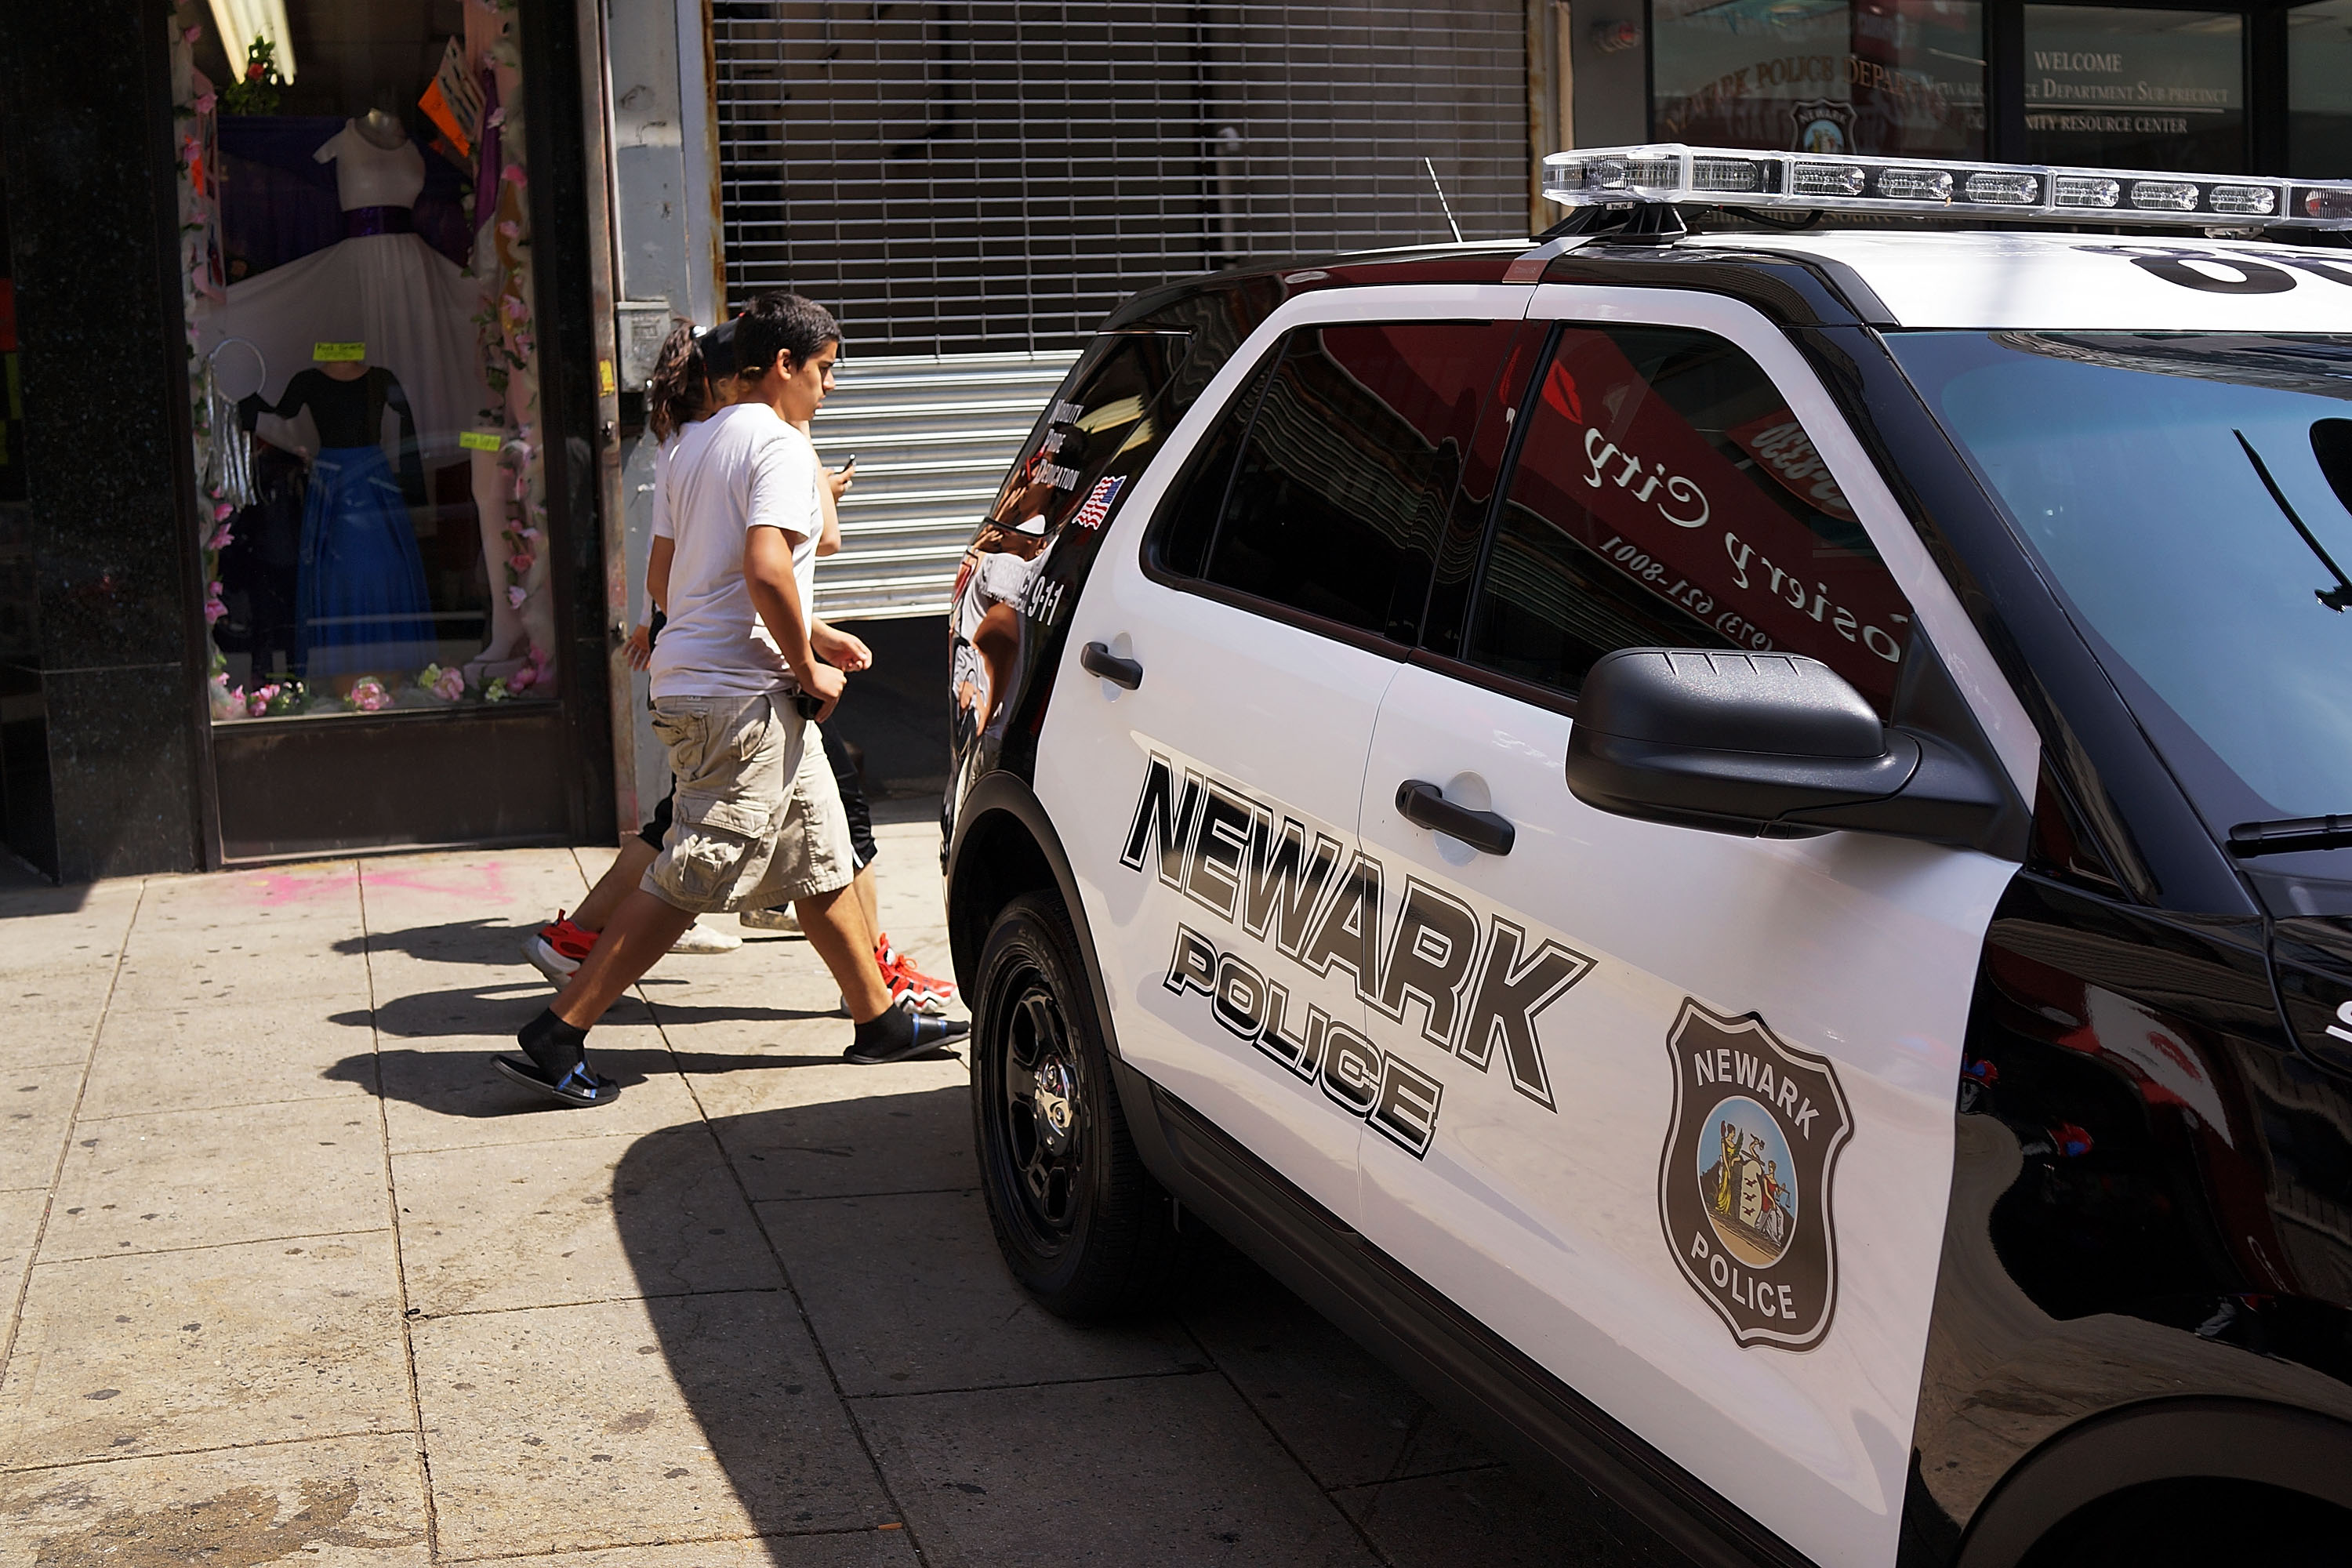 People walk by a police car in downtown on May 13, 2014 in Newark, New Jersey. (Spencer Platt&amp;mdash;Getty Images)